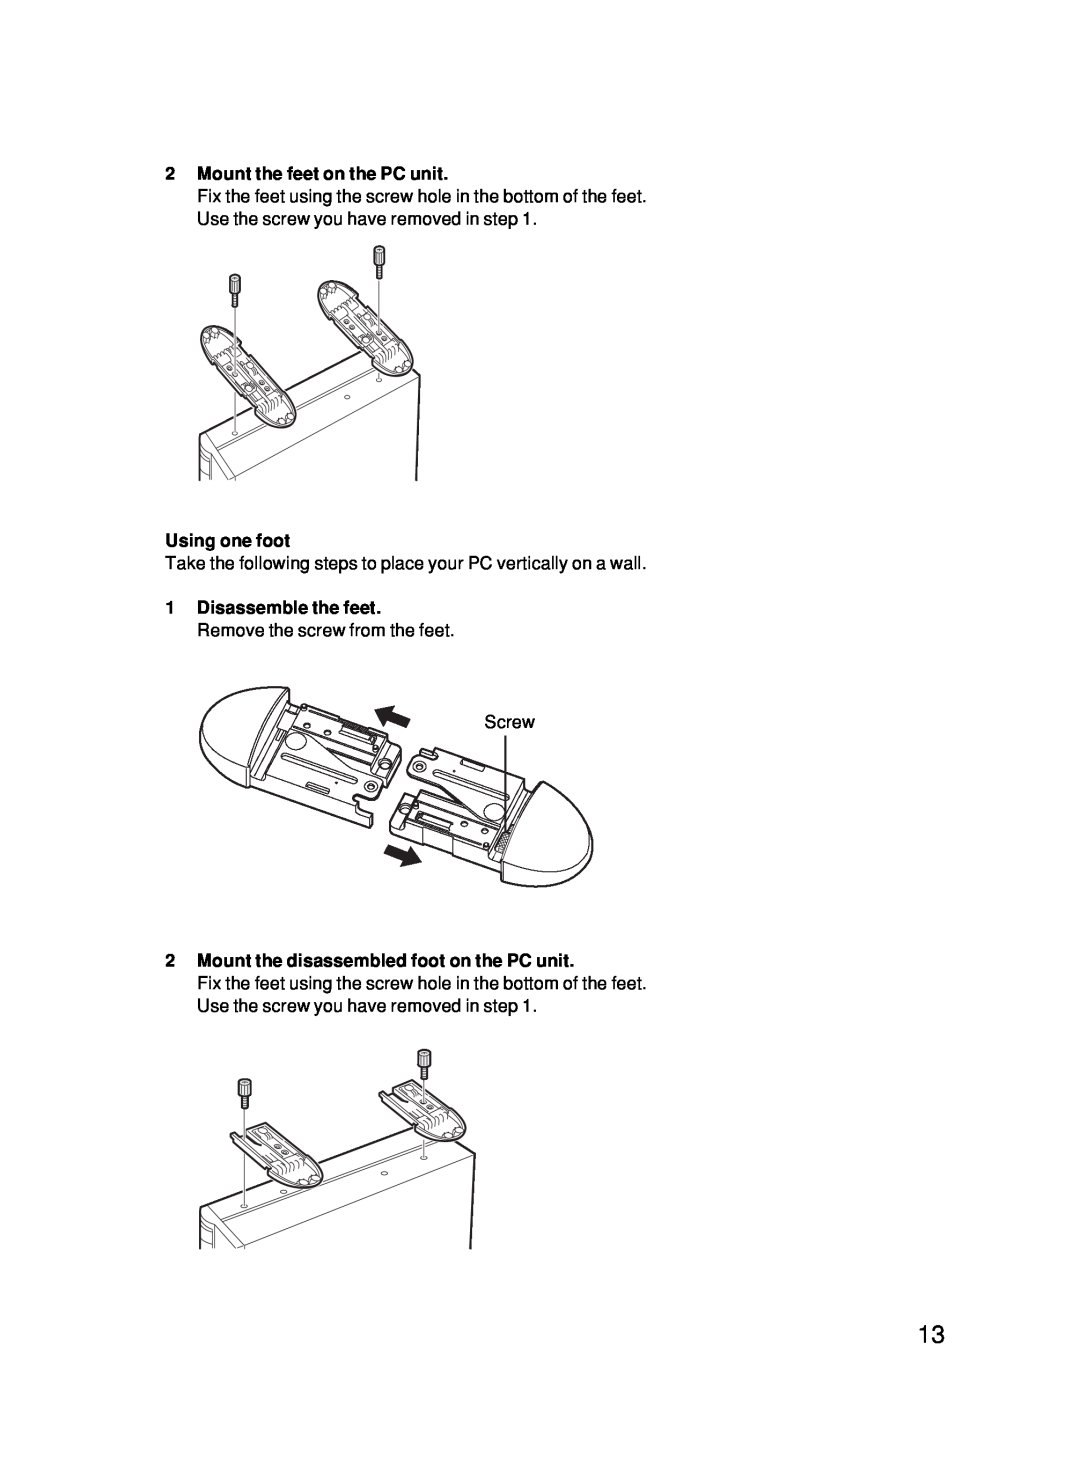 Fujitsu 500 user manual Mount the feet on the PC unit, Using one foot, Mount the disassembled foot on the PC unit 